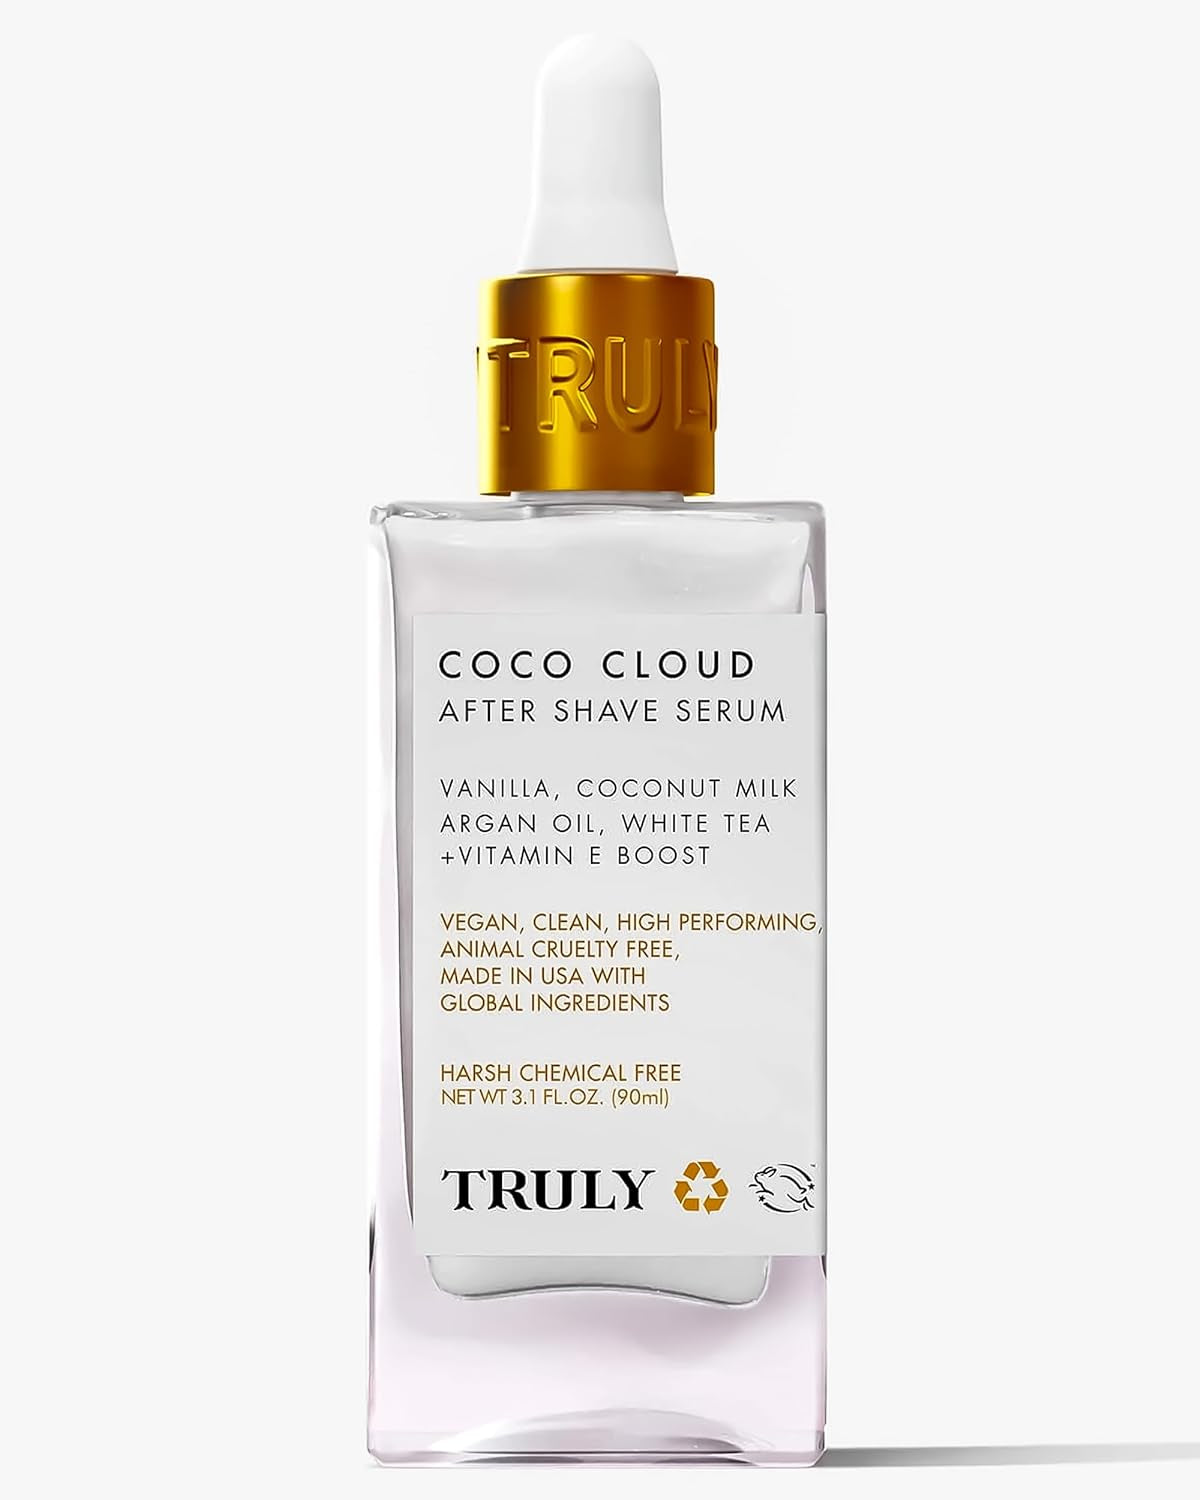 Professional Product Title: ```Truly Beauty Coco Cloud After Shave Serum - Hydrates and Soothes Post Shave Irritation with Argan Oil, Vanilla, and Coconut - Multi-Purpose After Shave Oil - 3 Fl Oz```